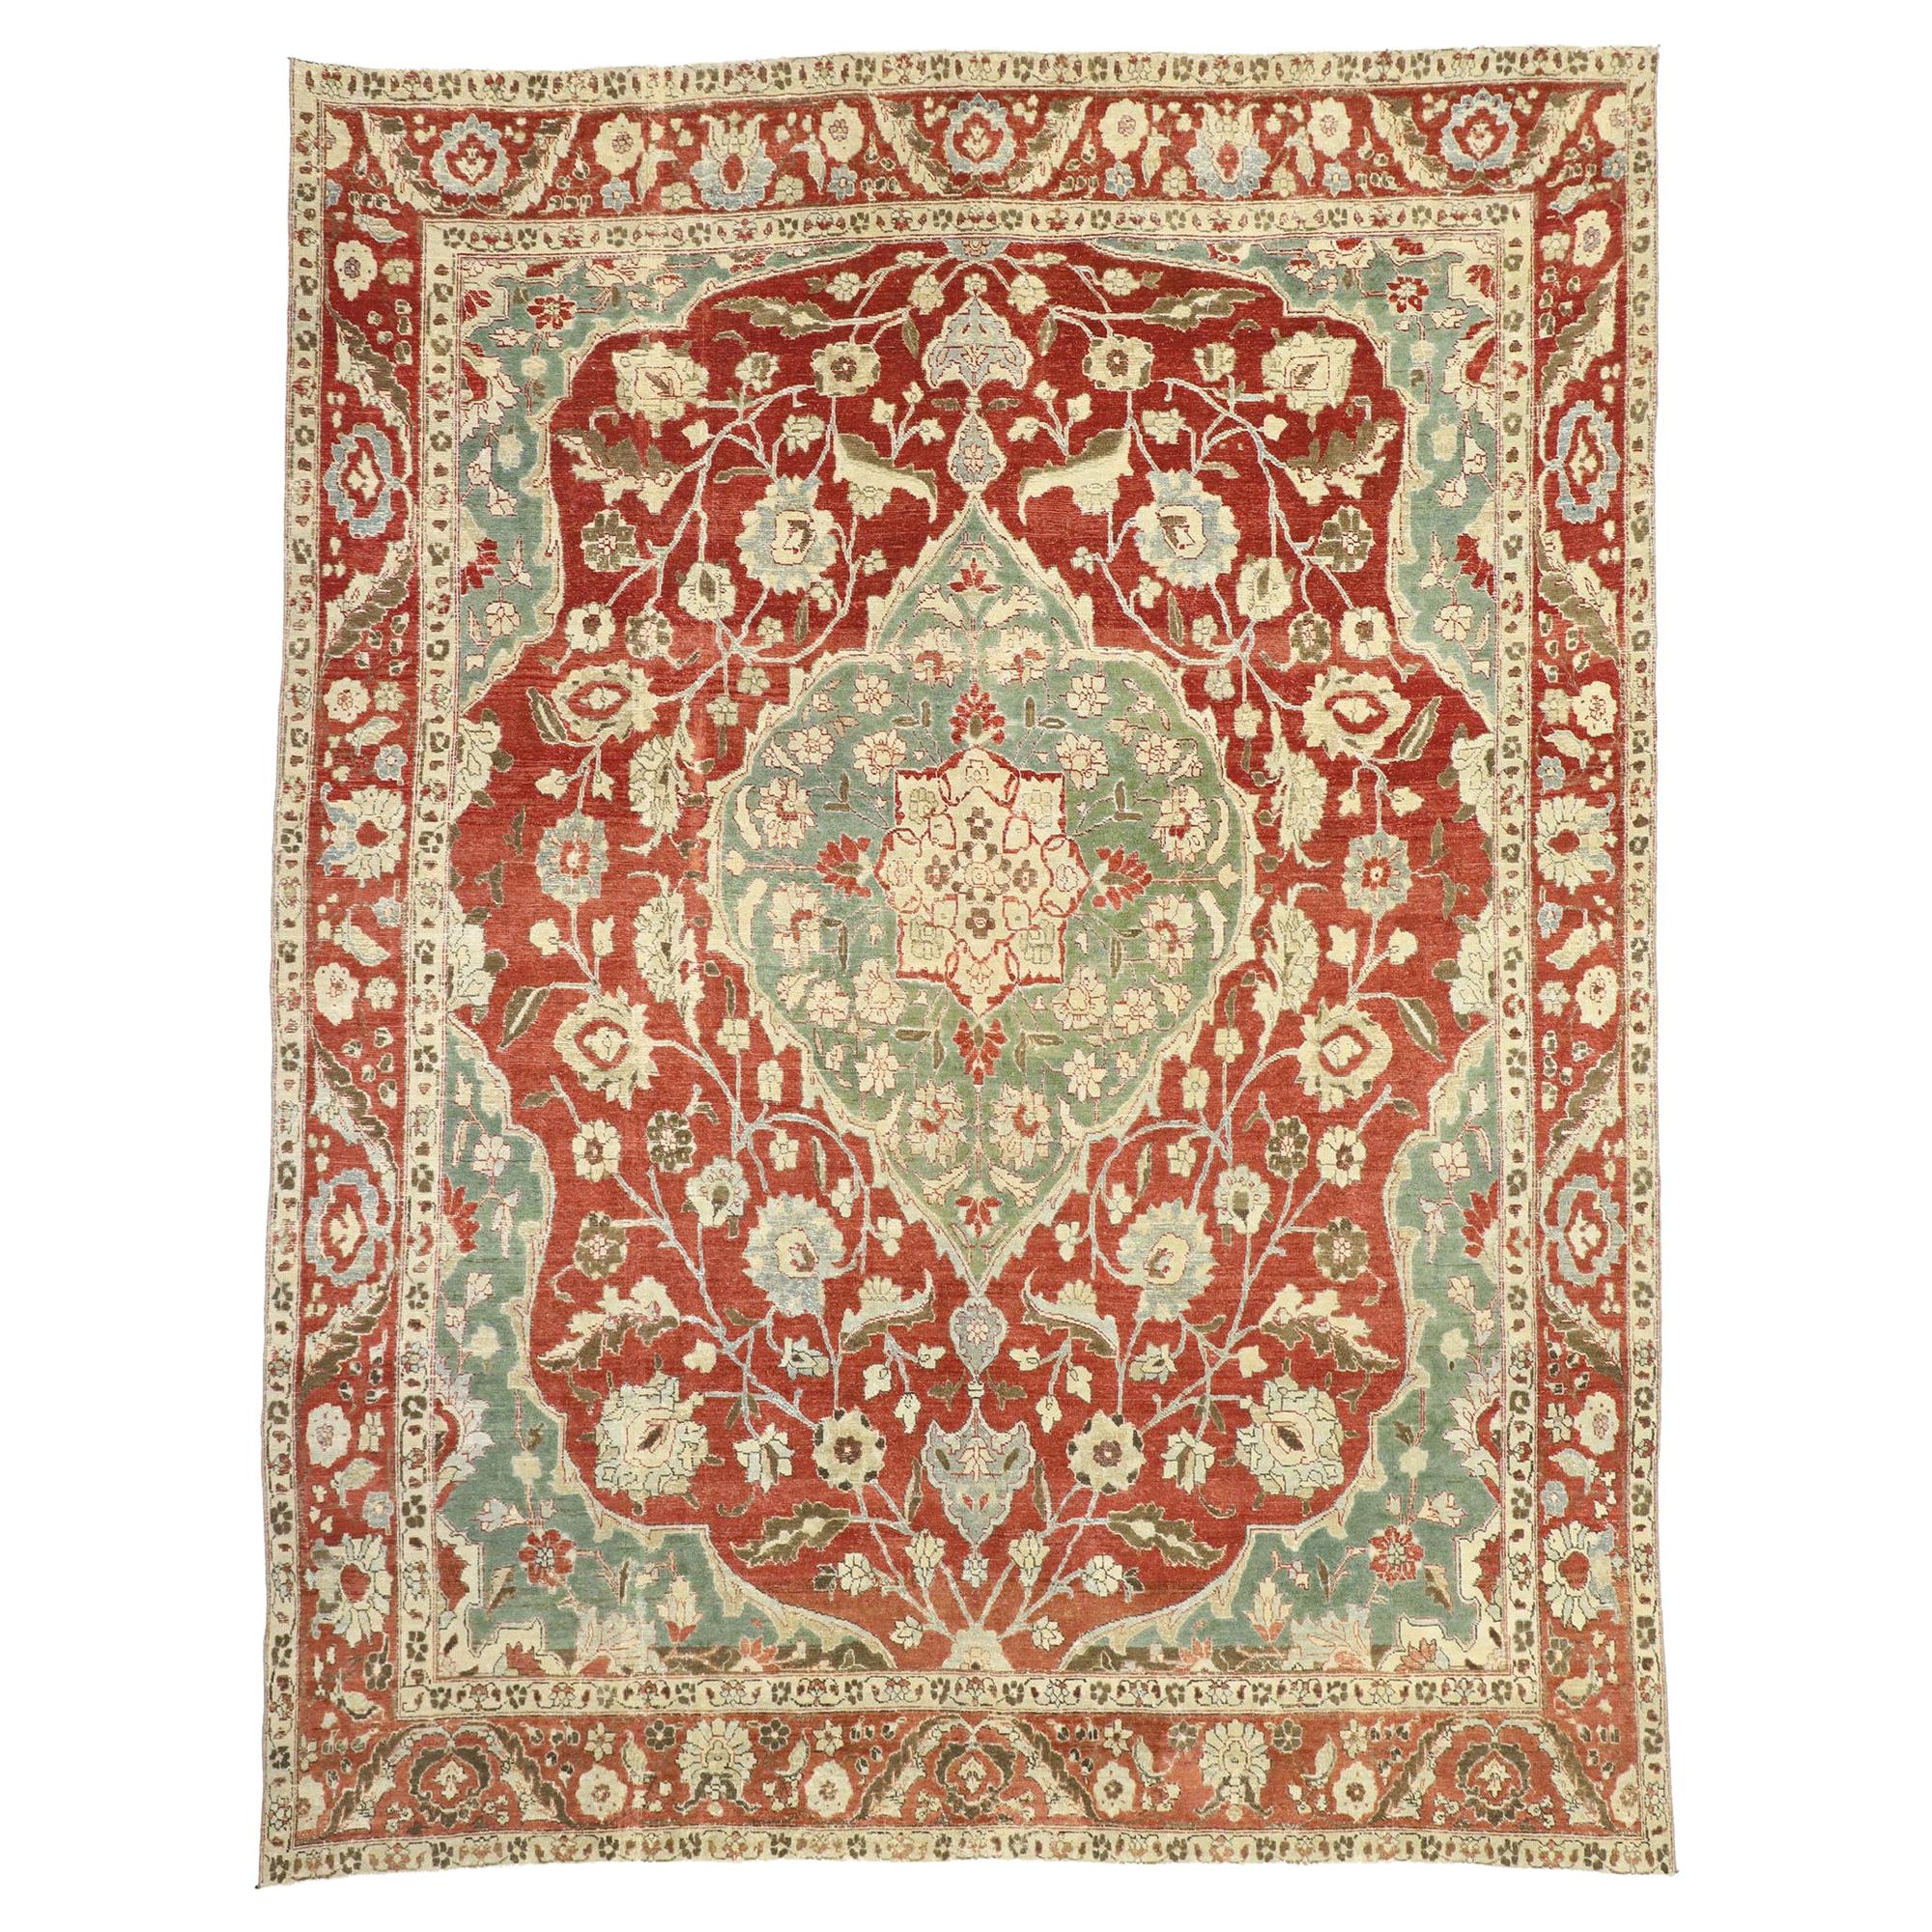 Distressed Antique Persian Mahal Design Rug with English Manor Chintz Style